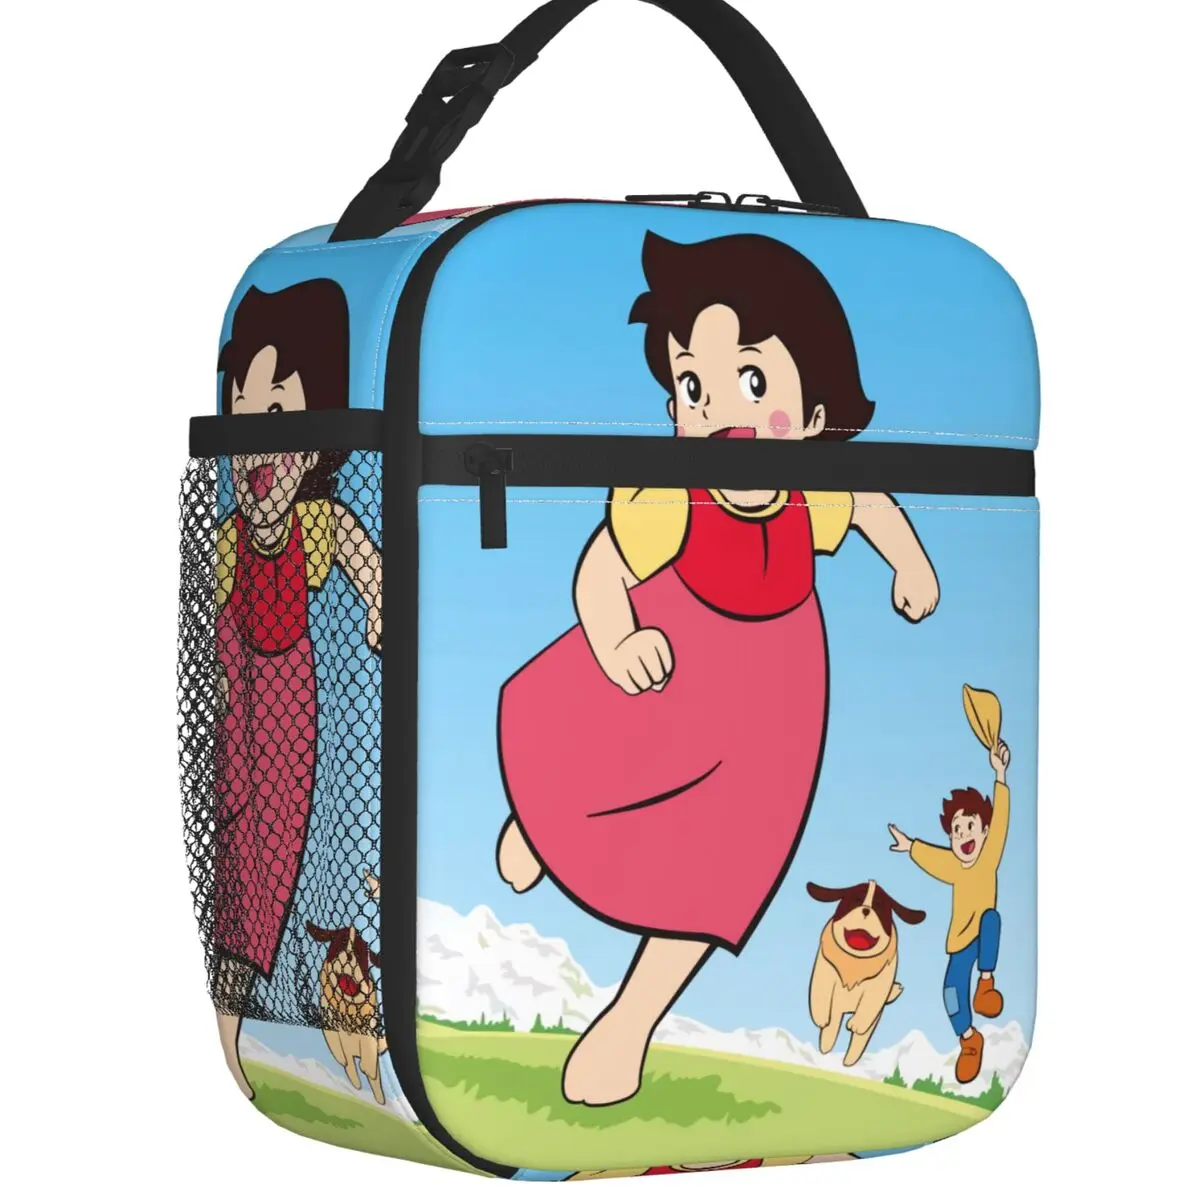 Happy Heidi With Peter Portable Lunch Box Leakproof Cartoon Alps Mountain Cooler Thermal Food Insulated Lunch Bag Office Work